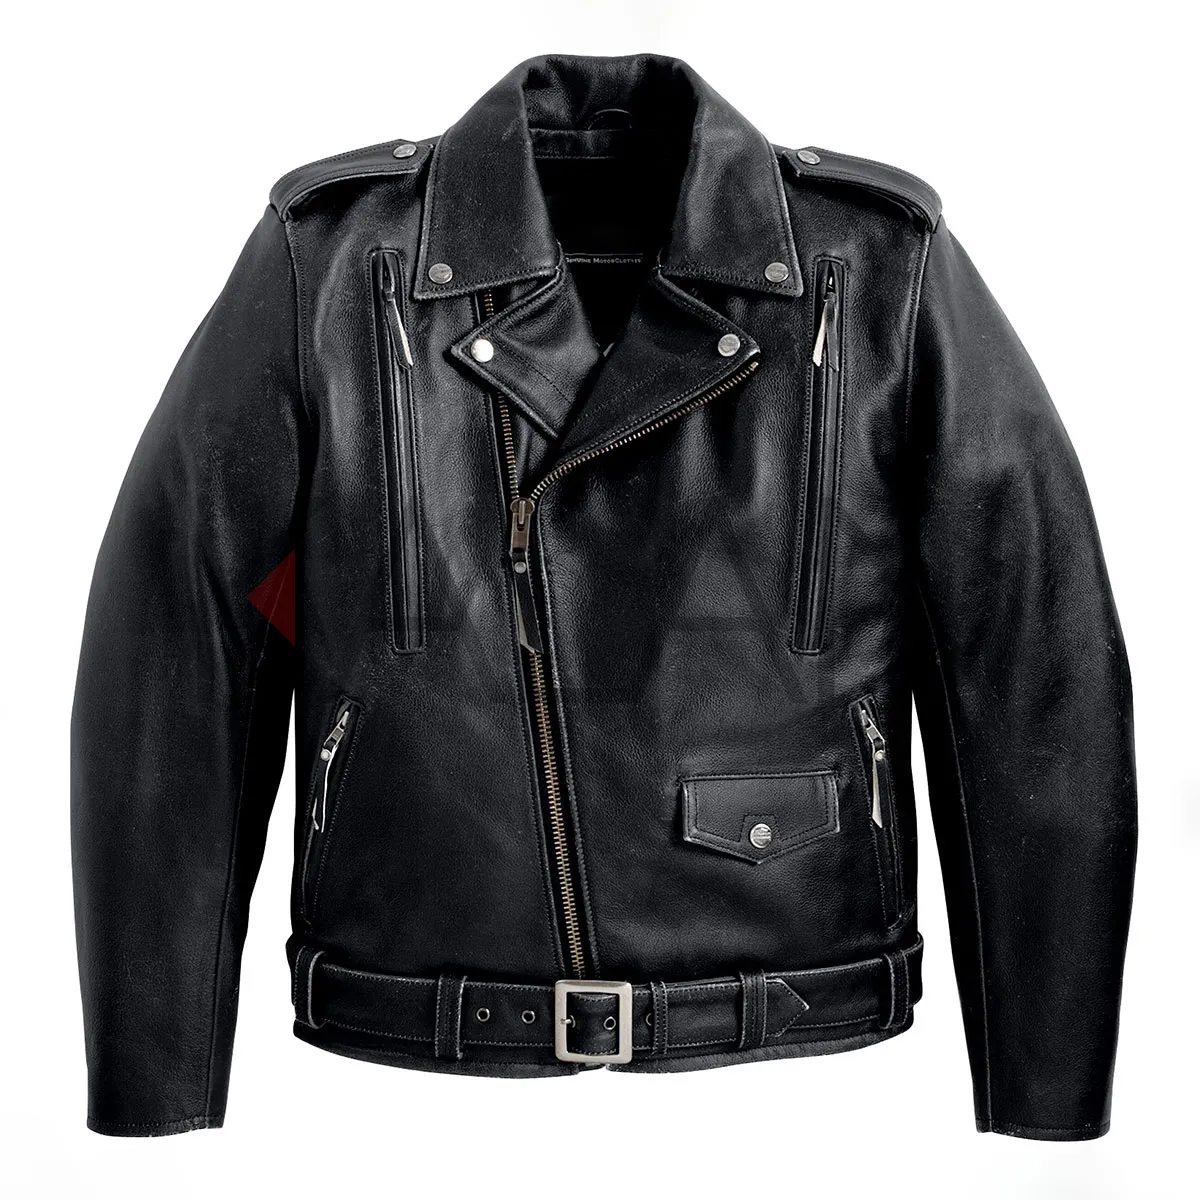 Front Flap Pocket Leather Fashion Jacket KLJM9 Made of High Quality Cow Leather Garments